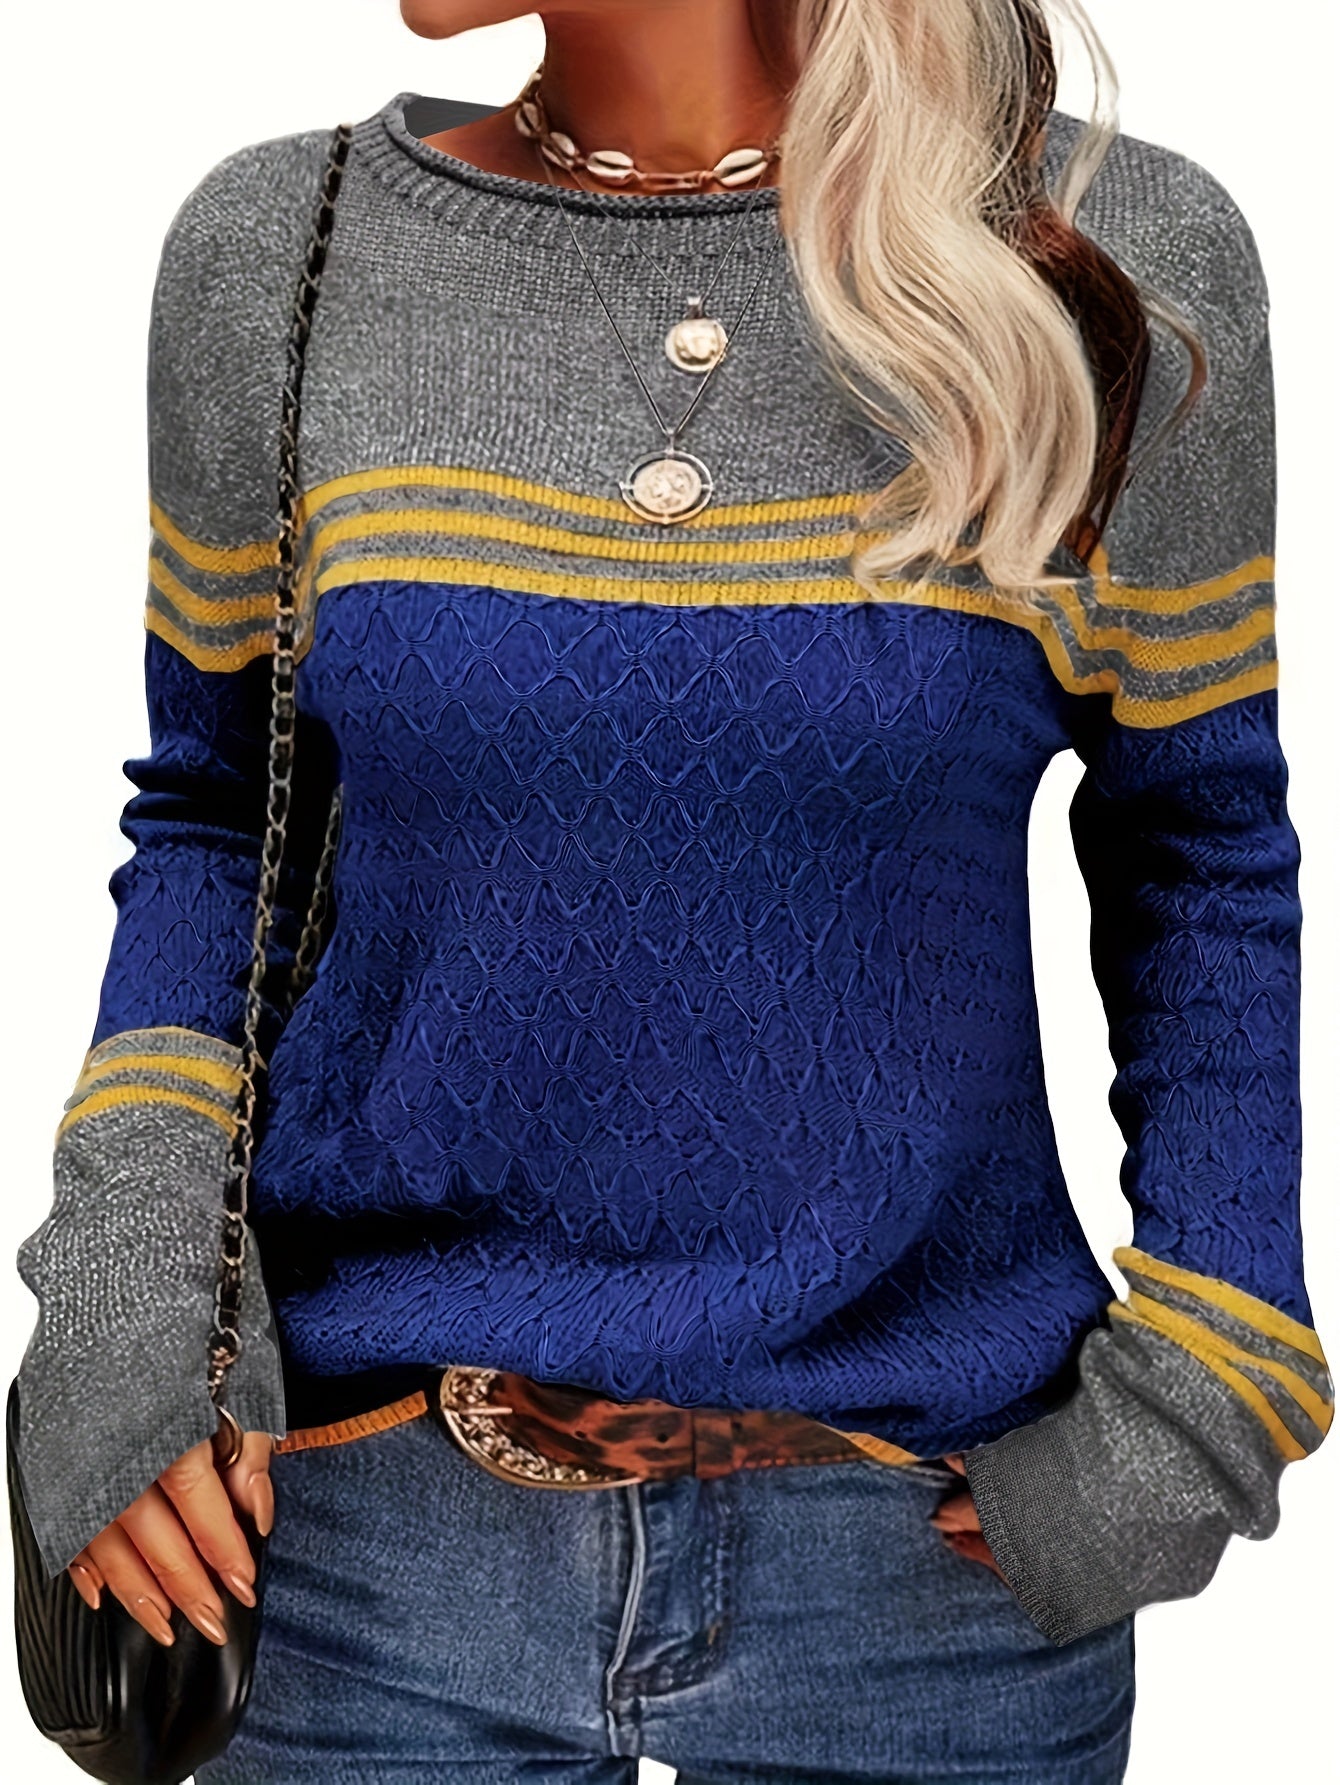 Antmvs Color Block Boat Neck Knitted Top, Casual Long Sleeve Pullover Sweater For Fall & Winter, Women's Clothing